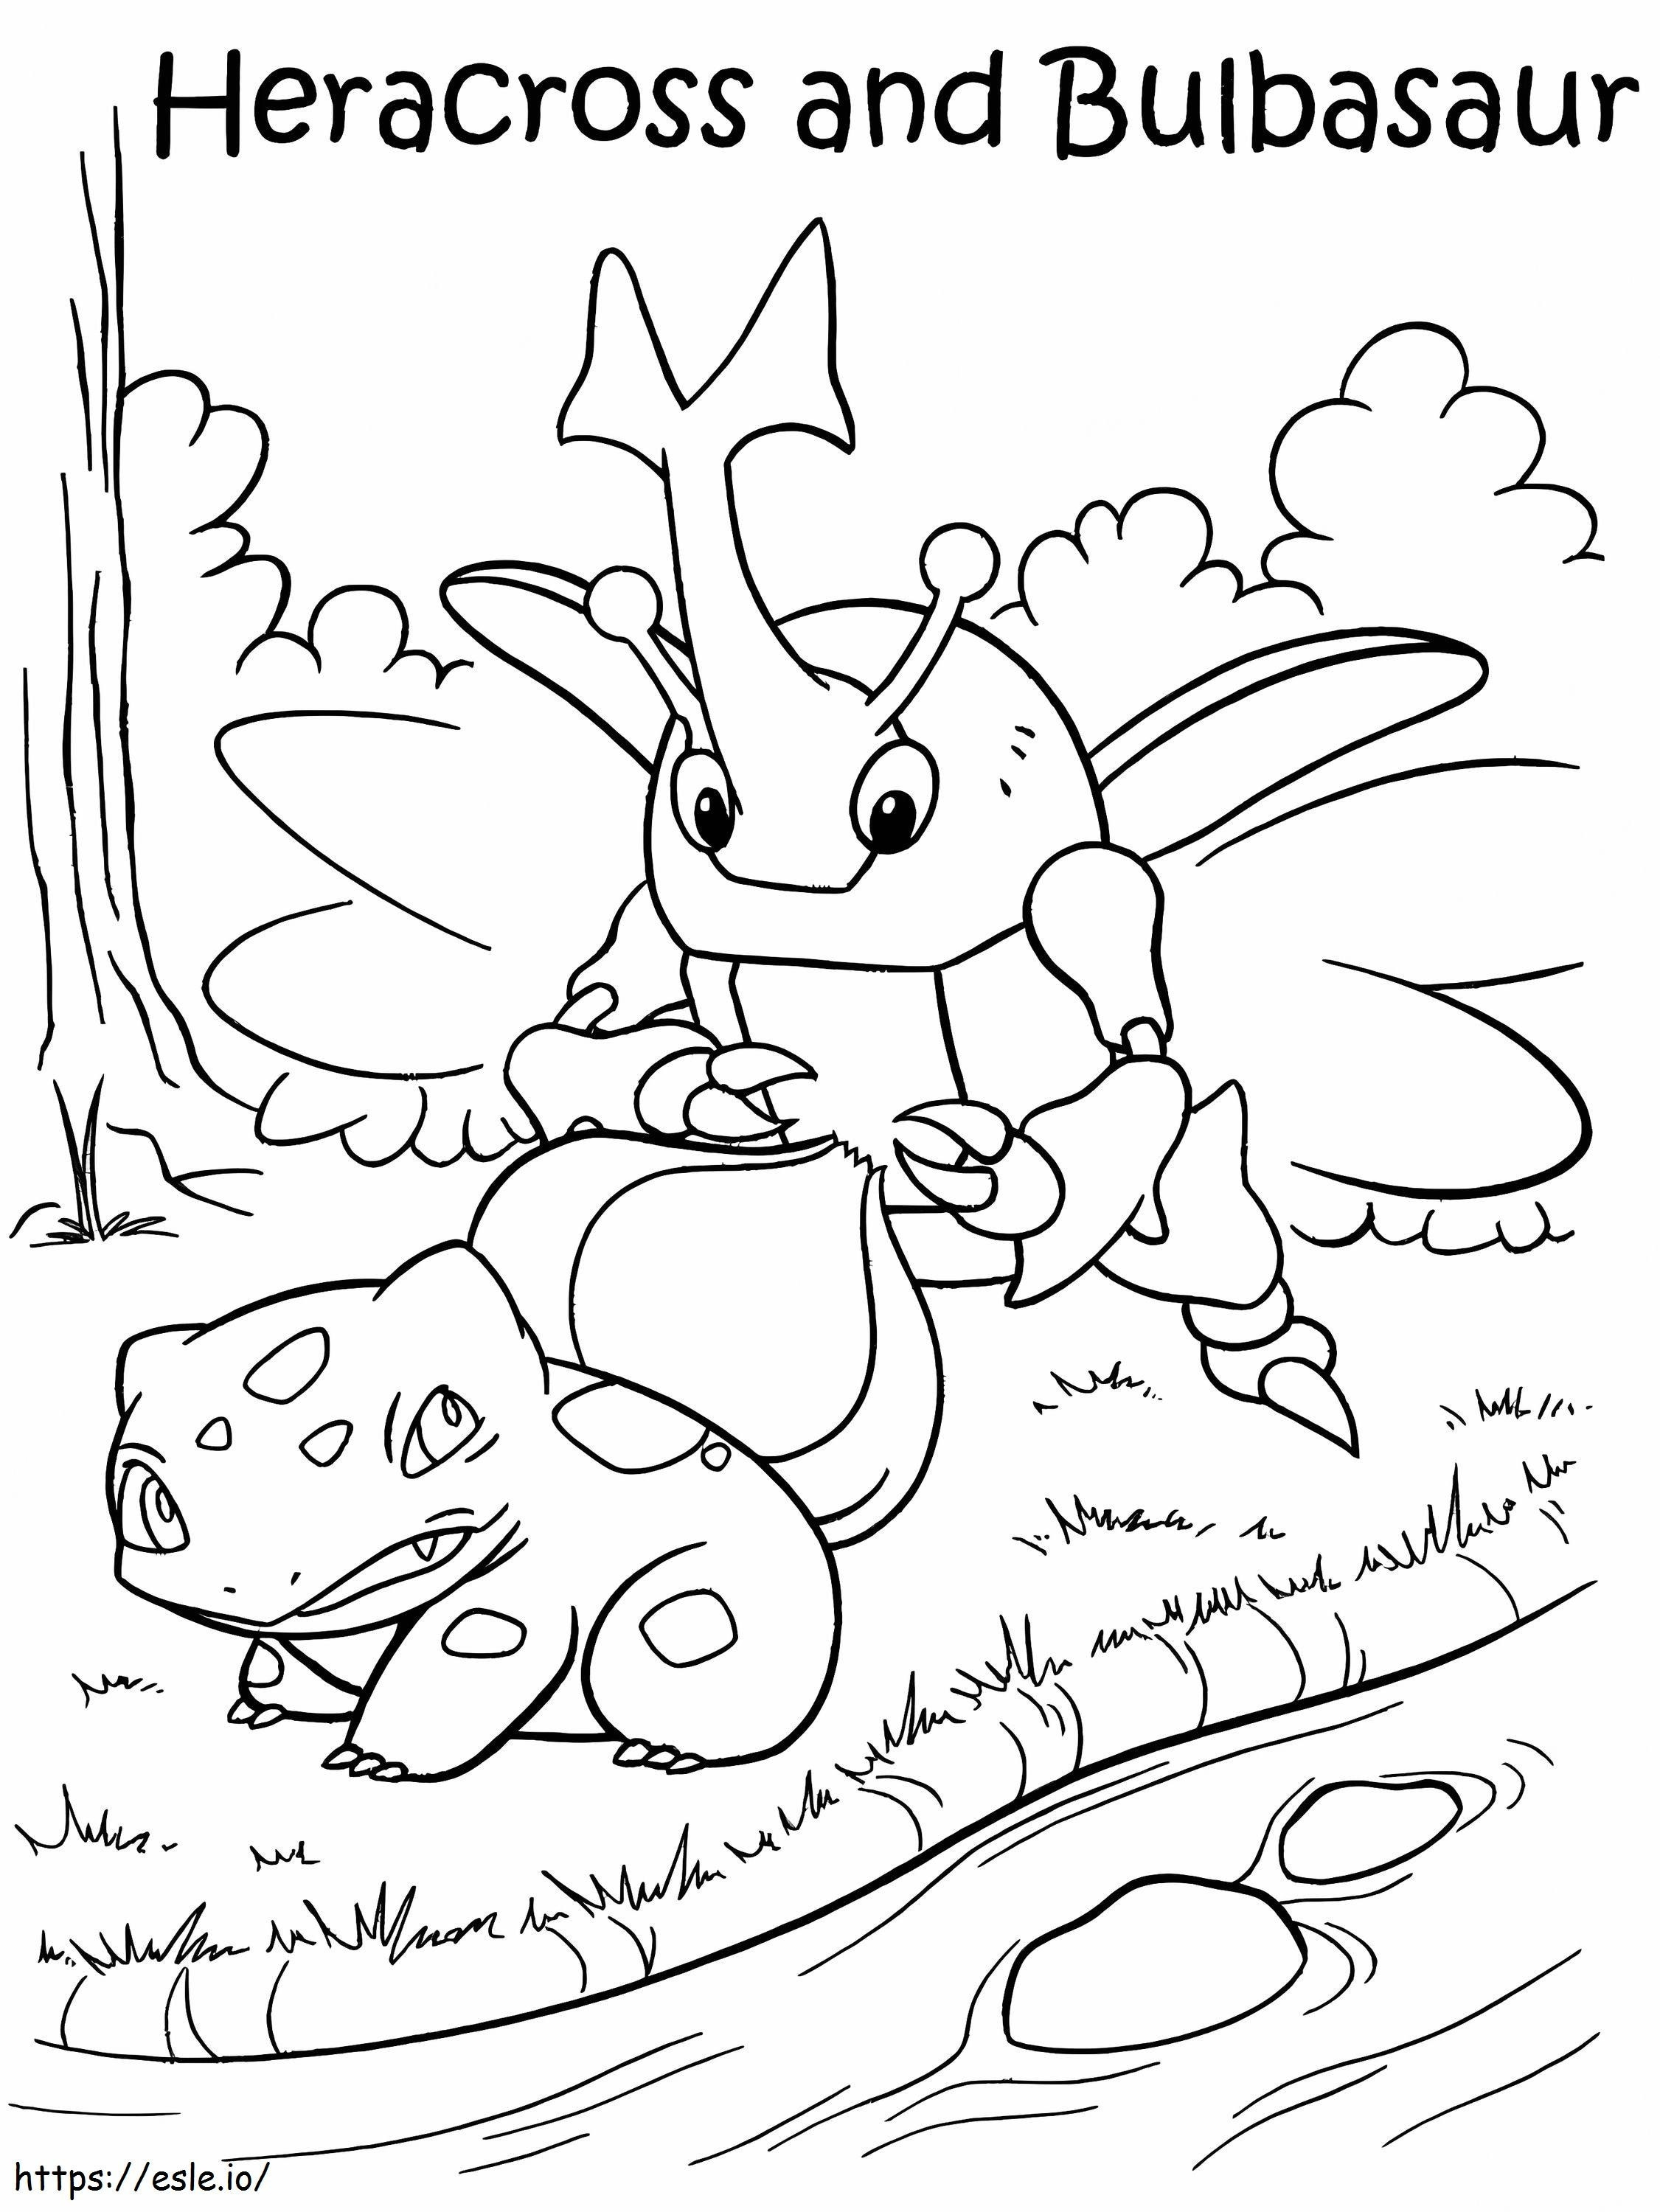 Bulbasaur And Heracross Pokemon coloring page